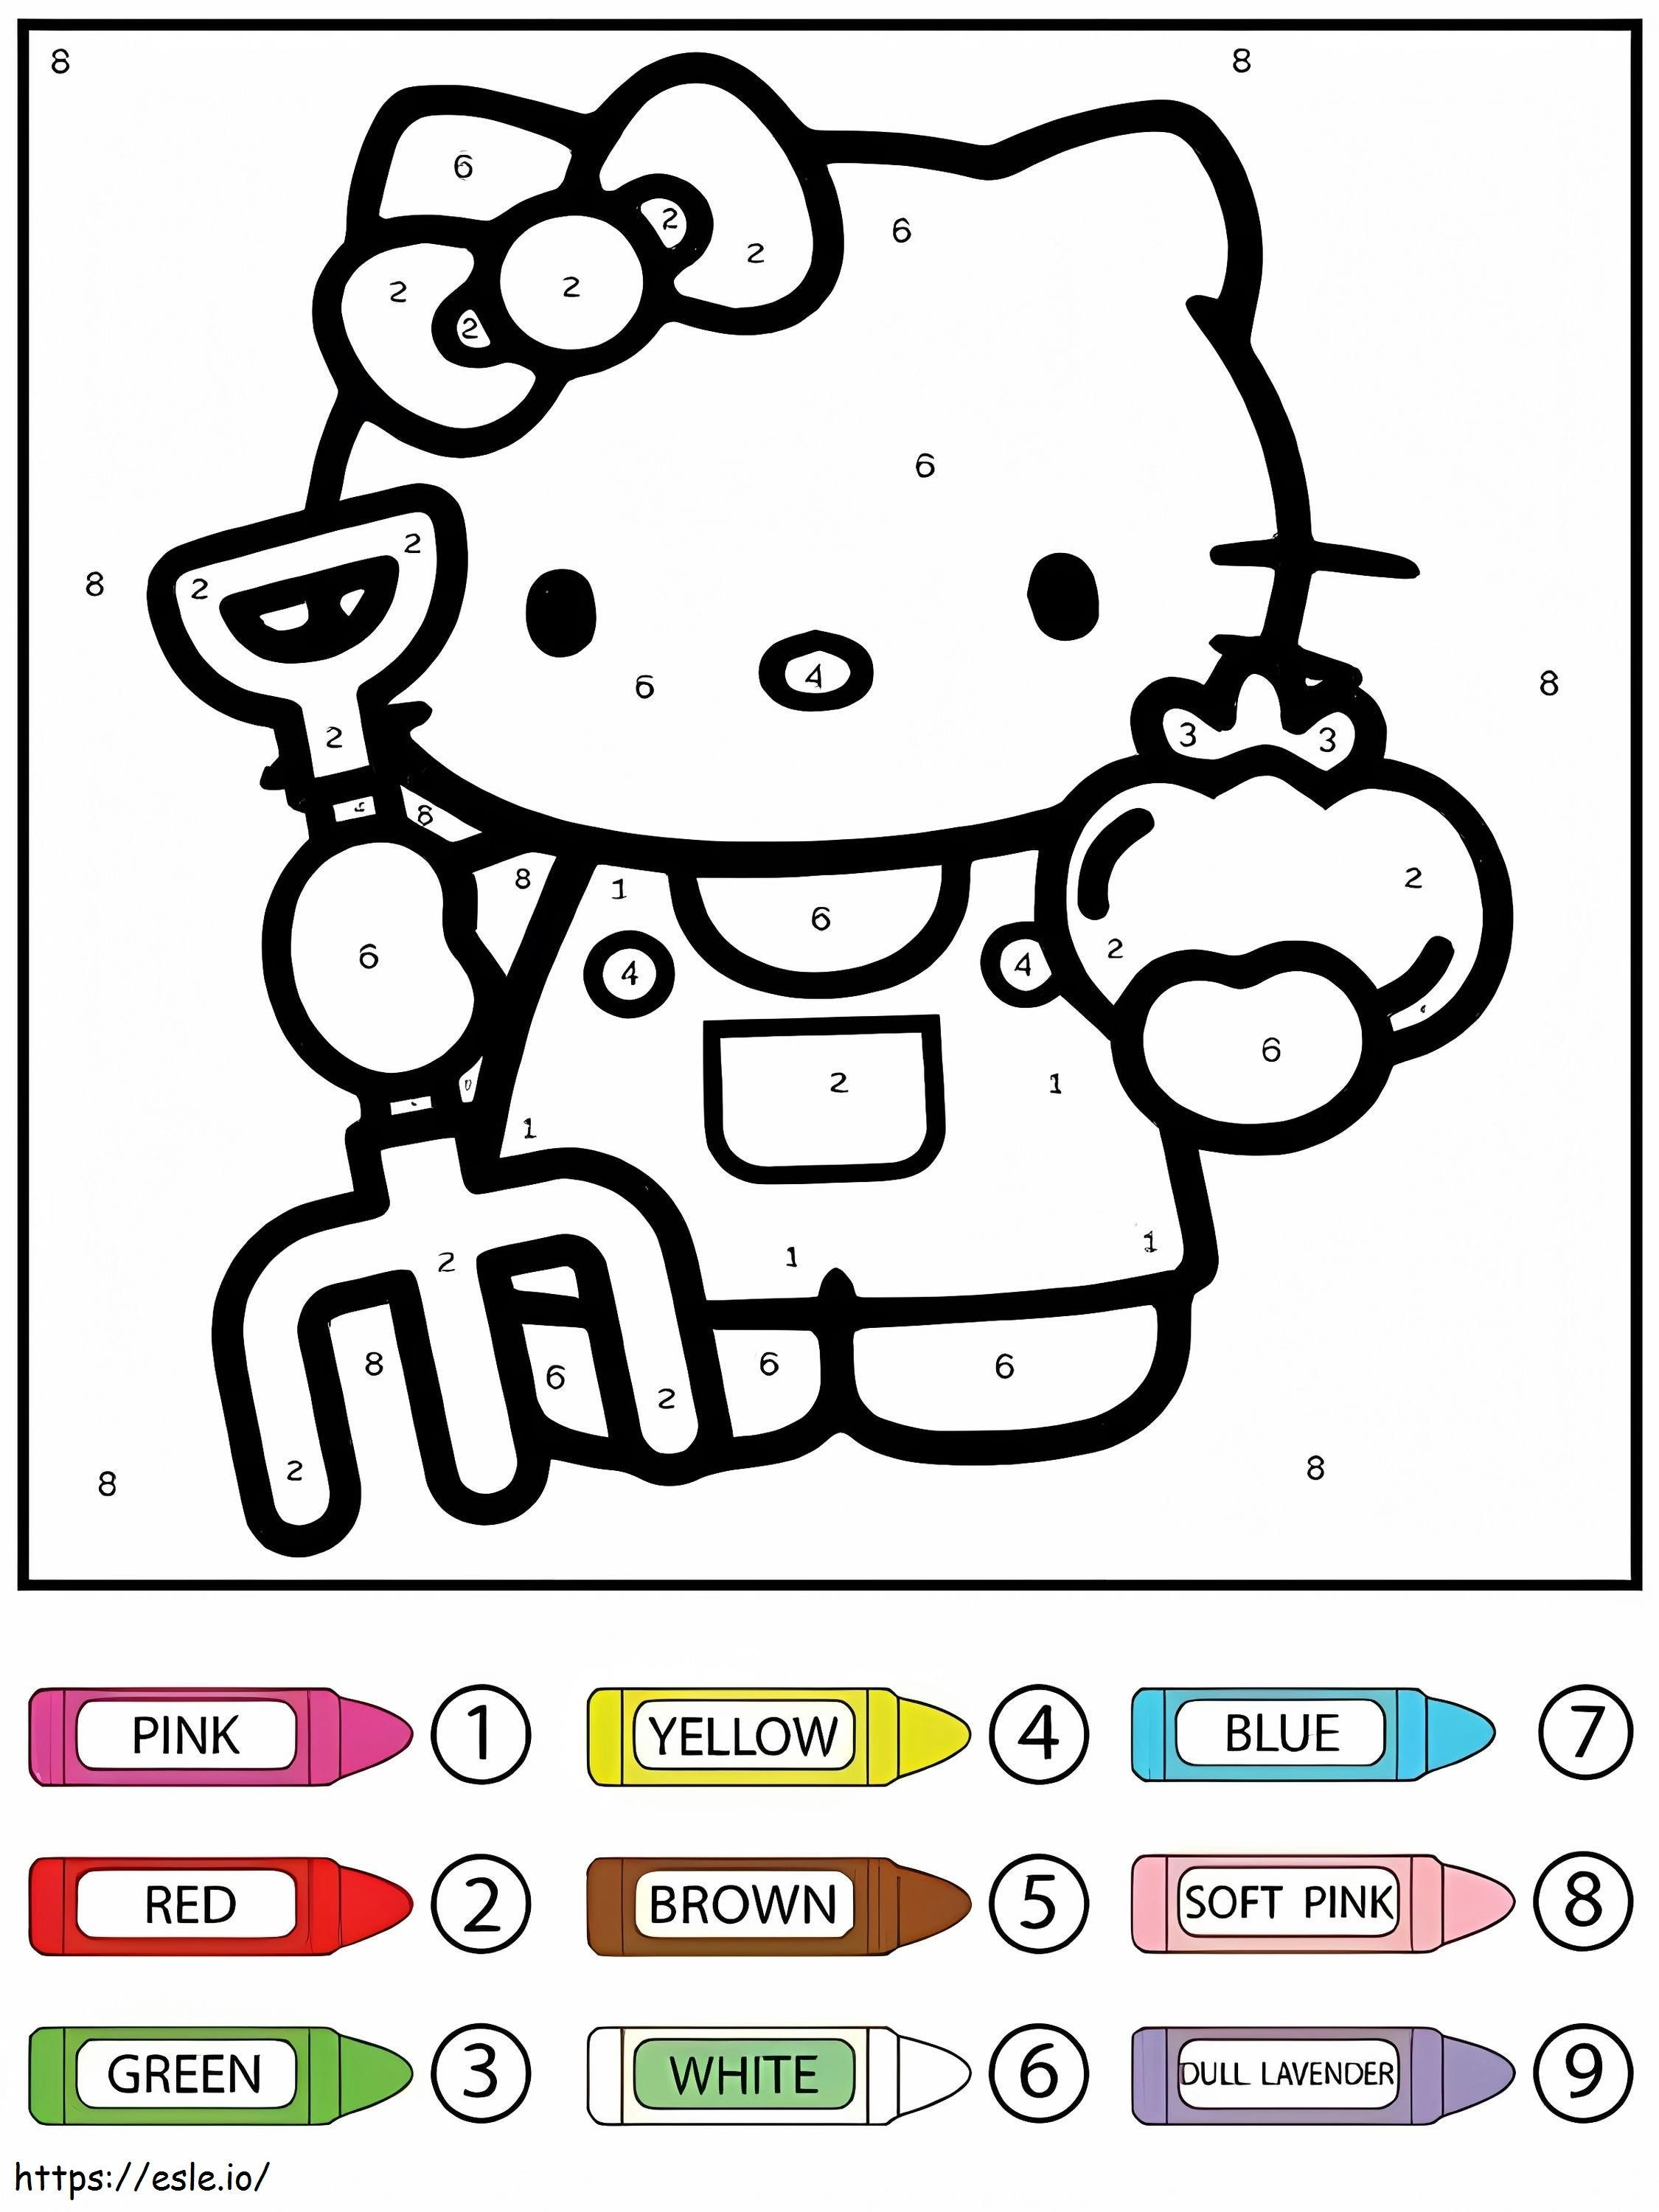 Gardener Hello Kitty Color By Number coloring page